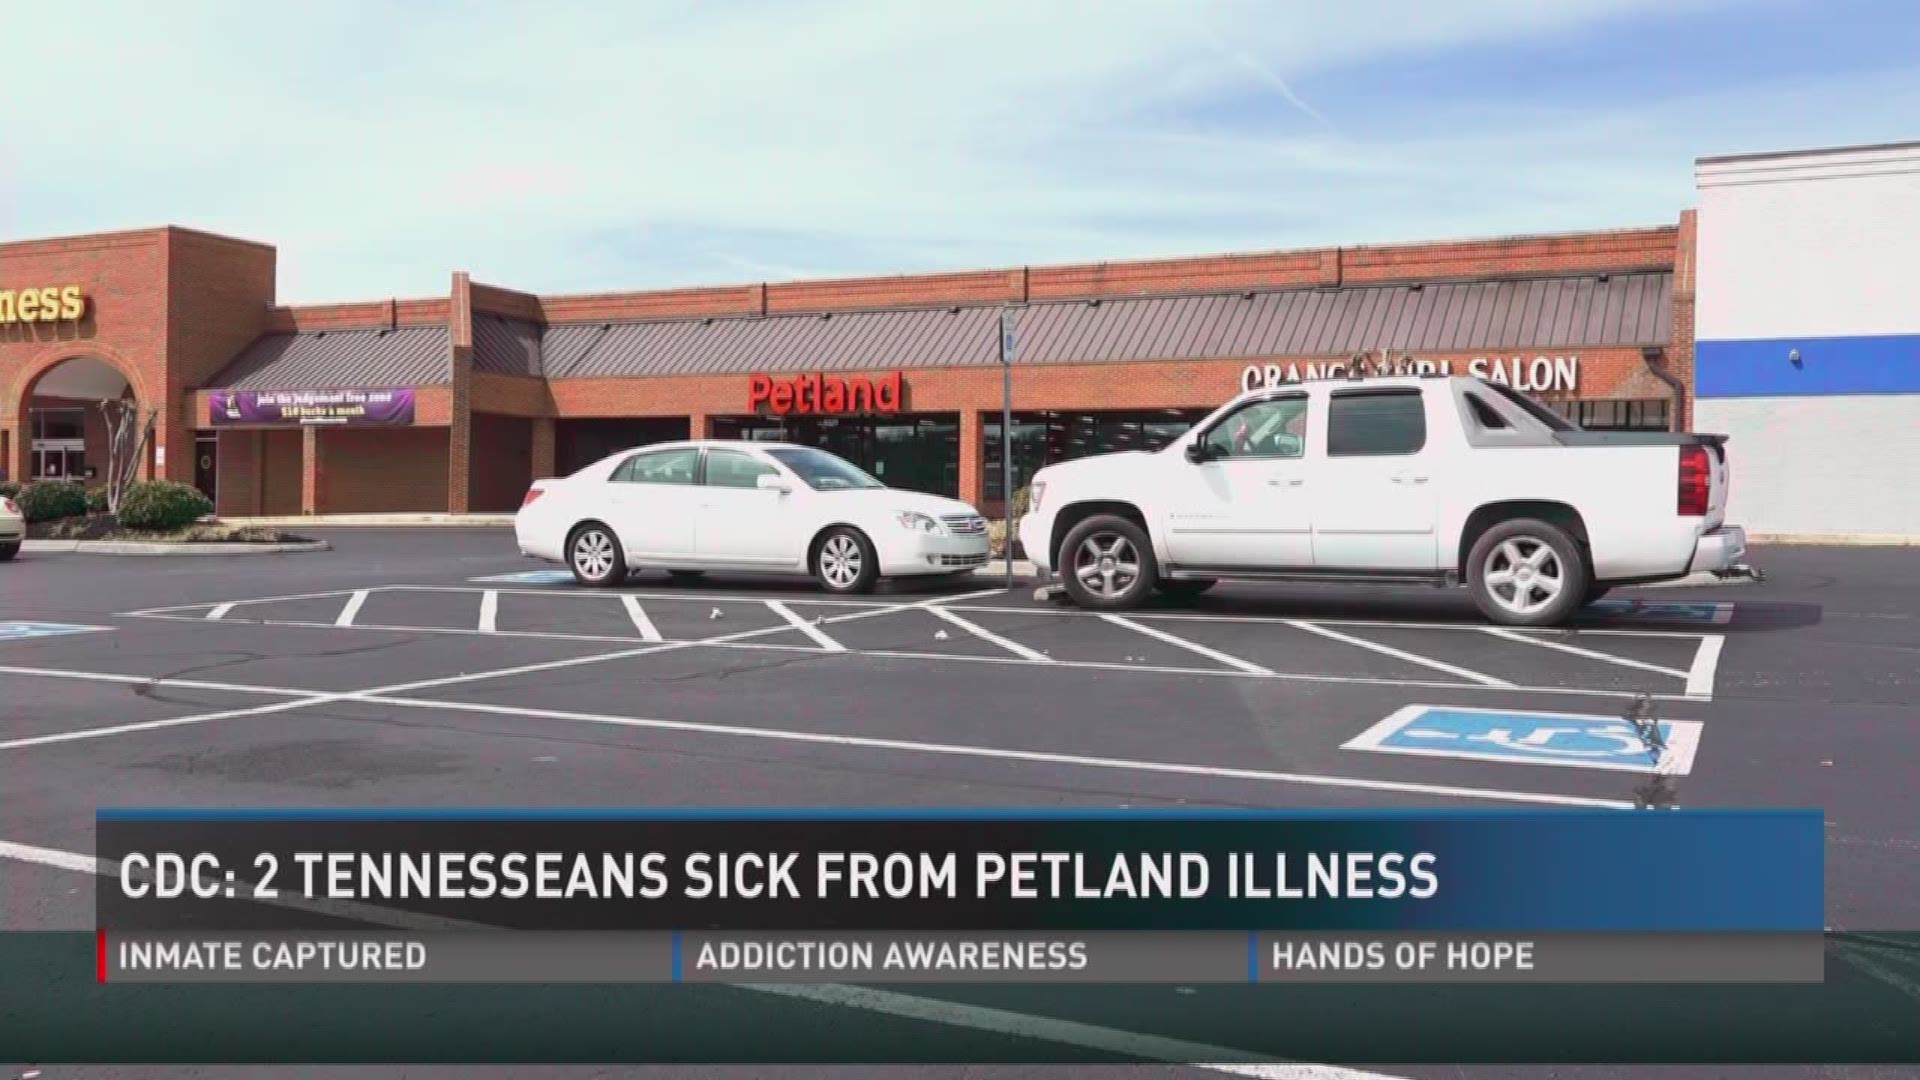 Oct. 5, 2017: The CDC says two people in Tennessee are sick after coming in contact with puppies at the Petland pet store.